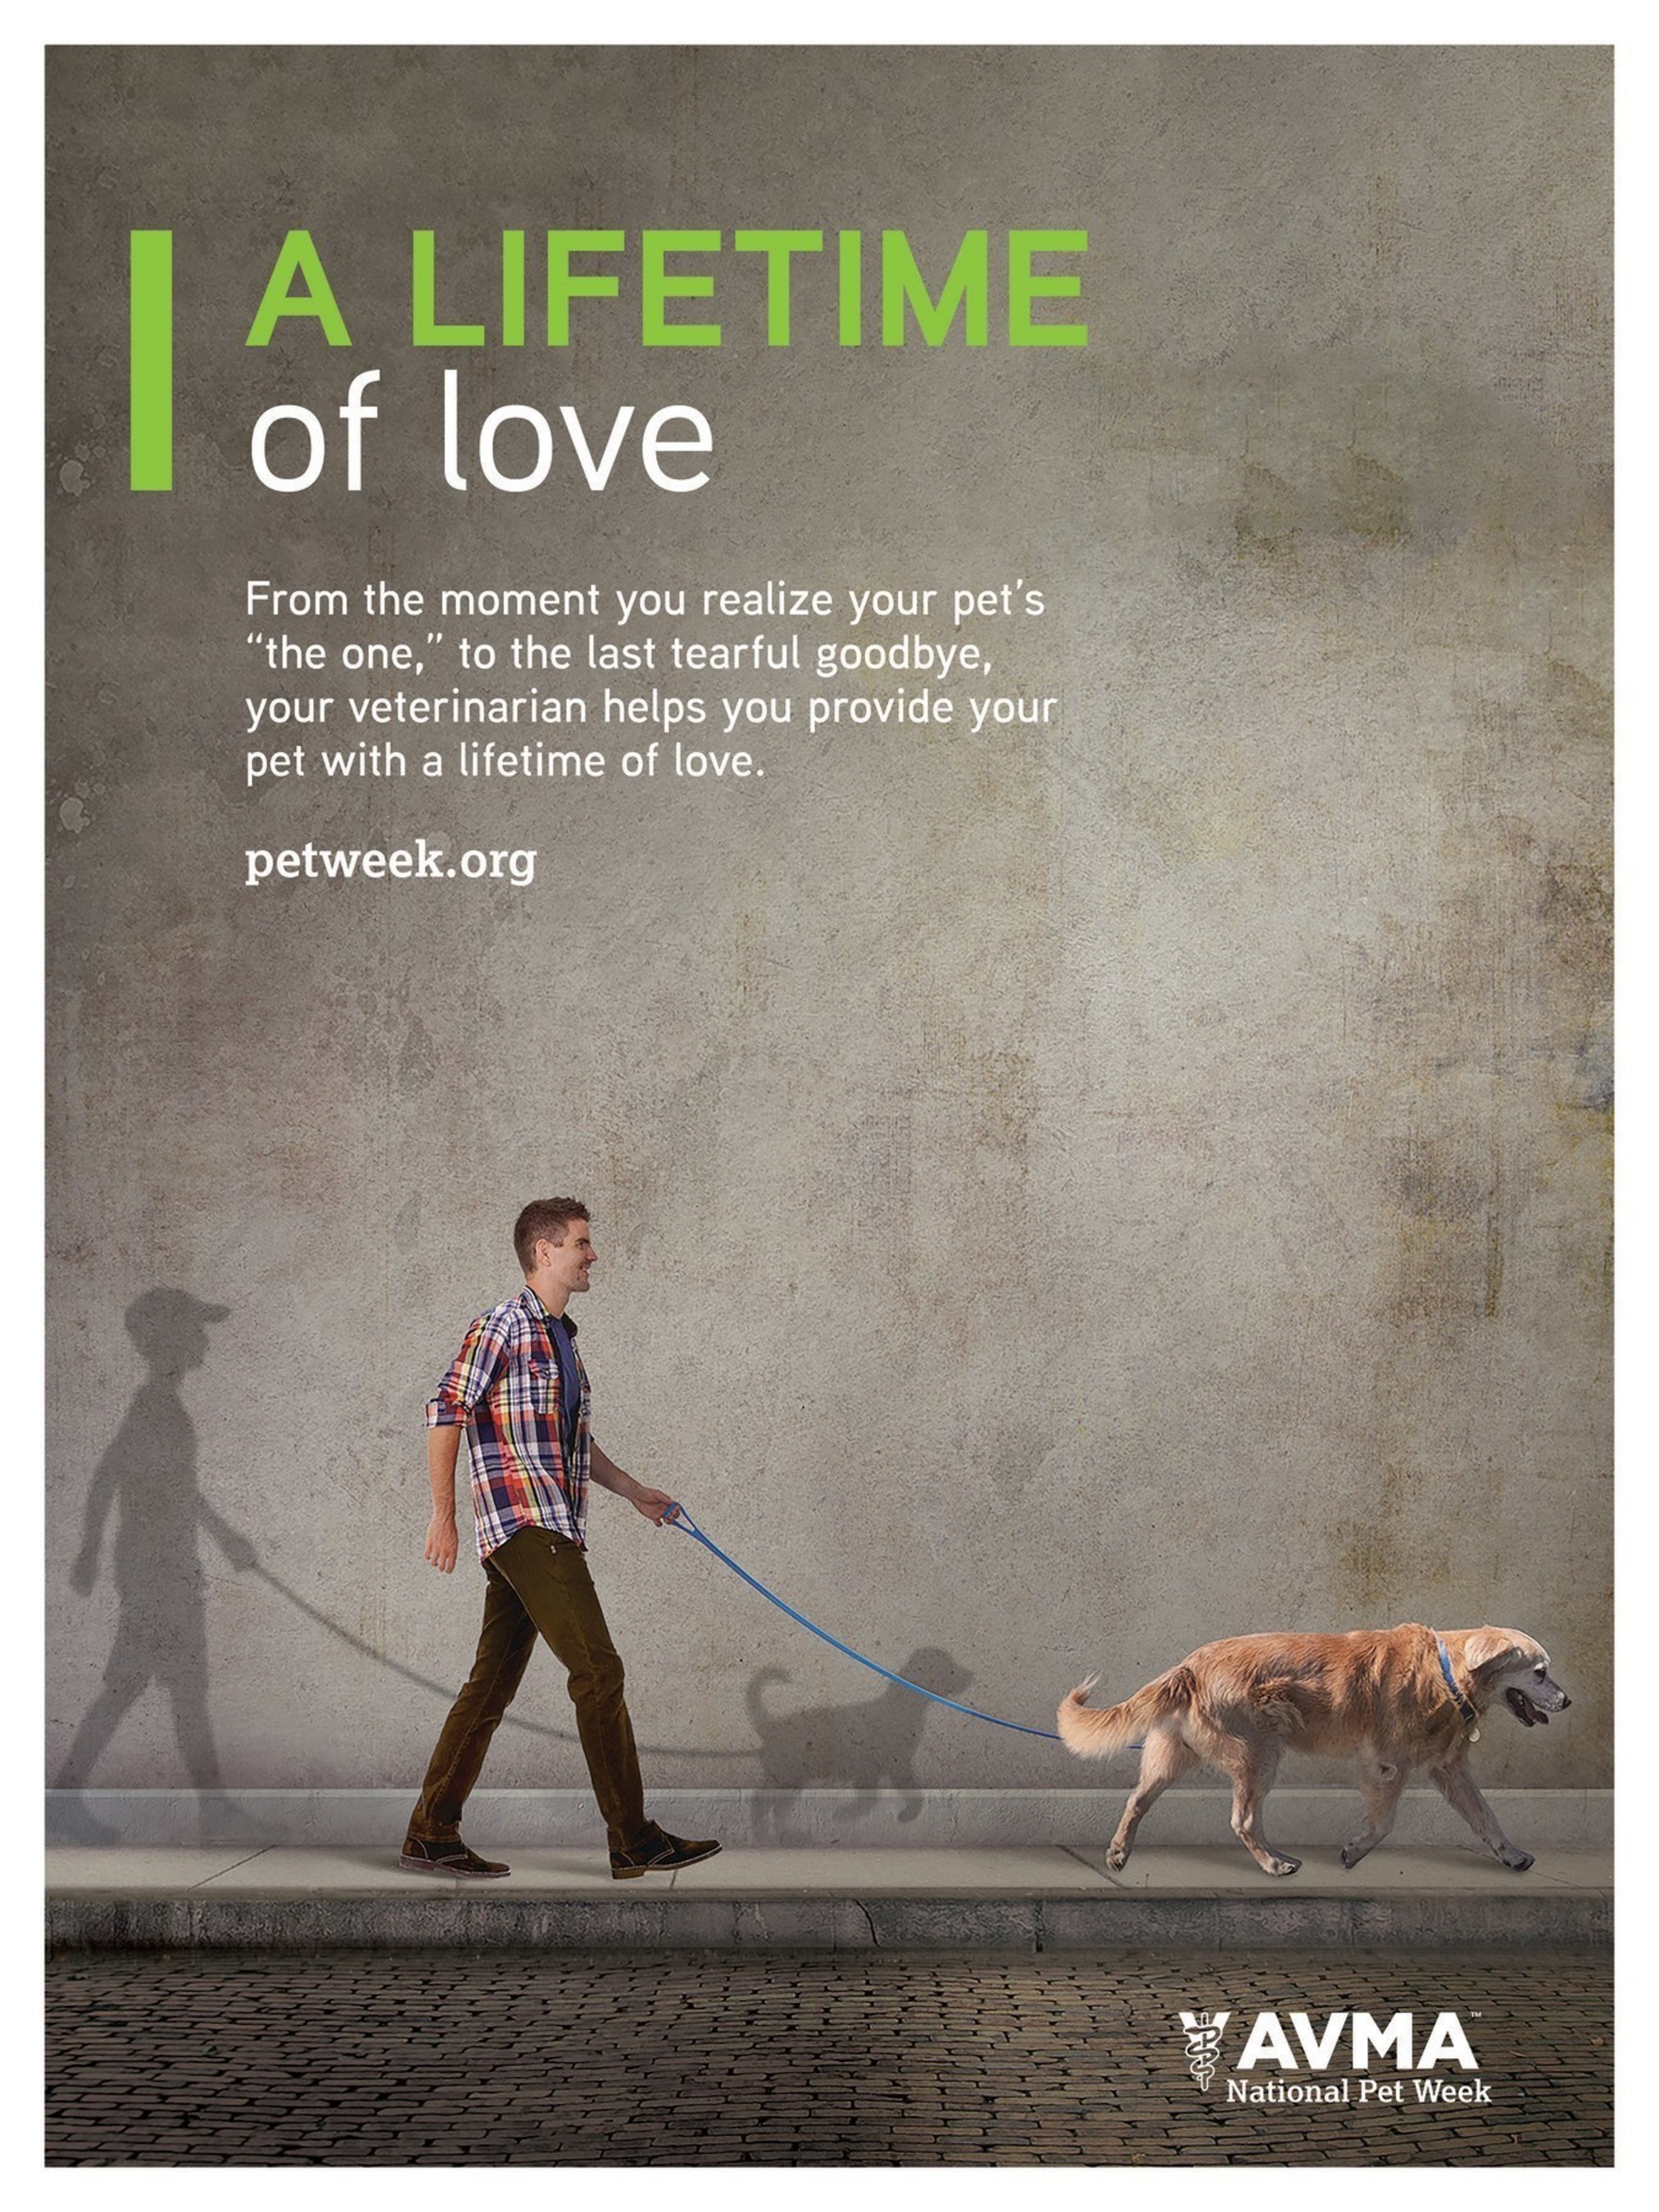 National Pet Week, May 1-7 celebrates veterinarians and clients partnering to provide pets with A Lifetime of Love